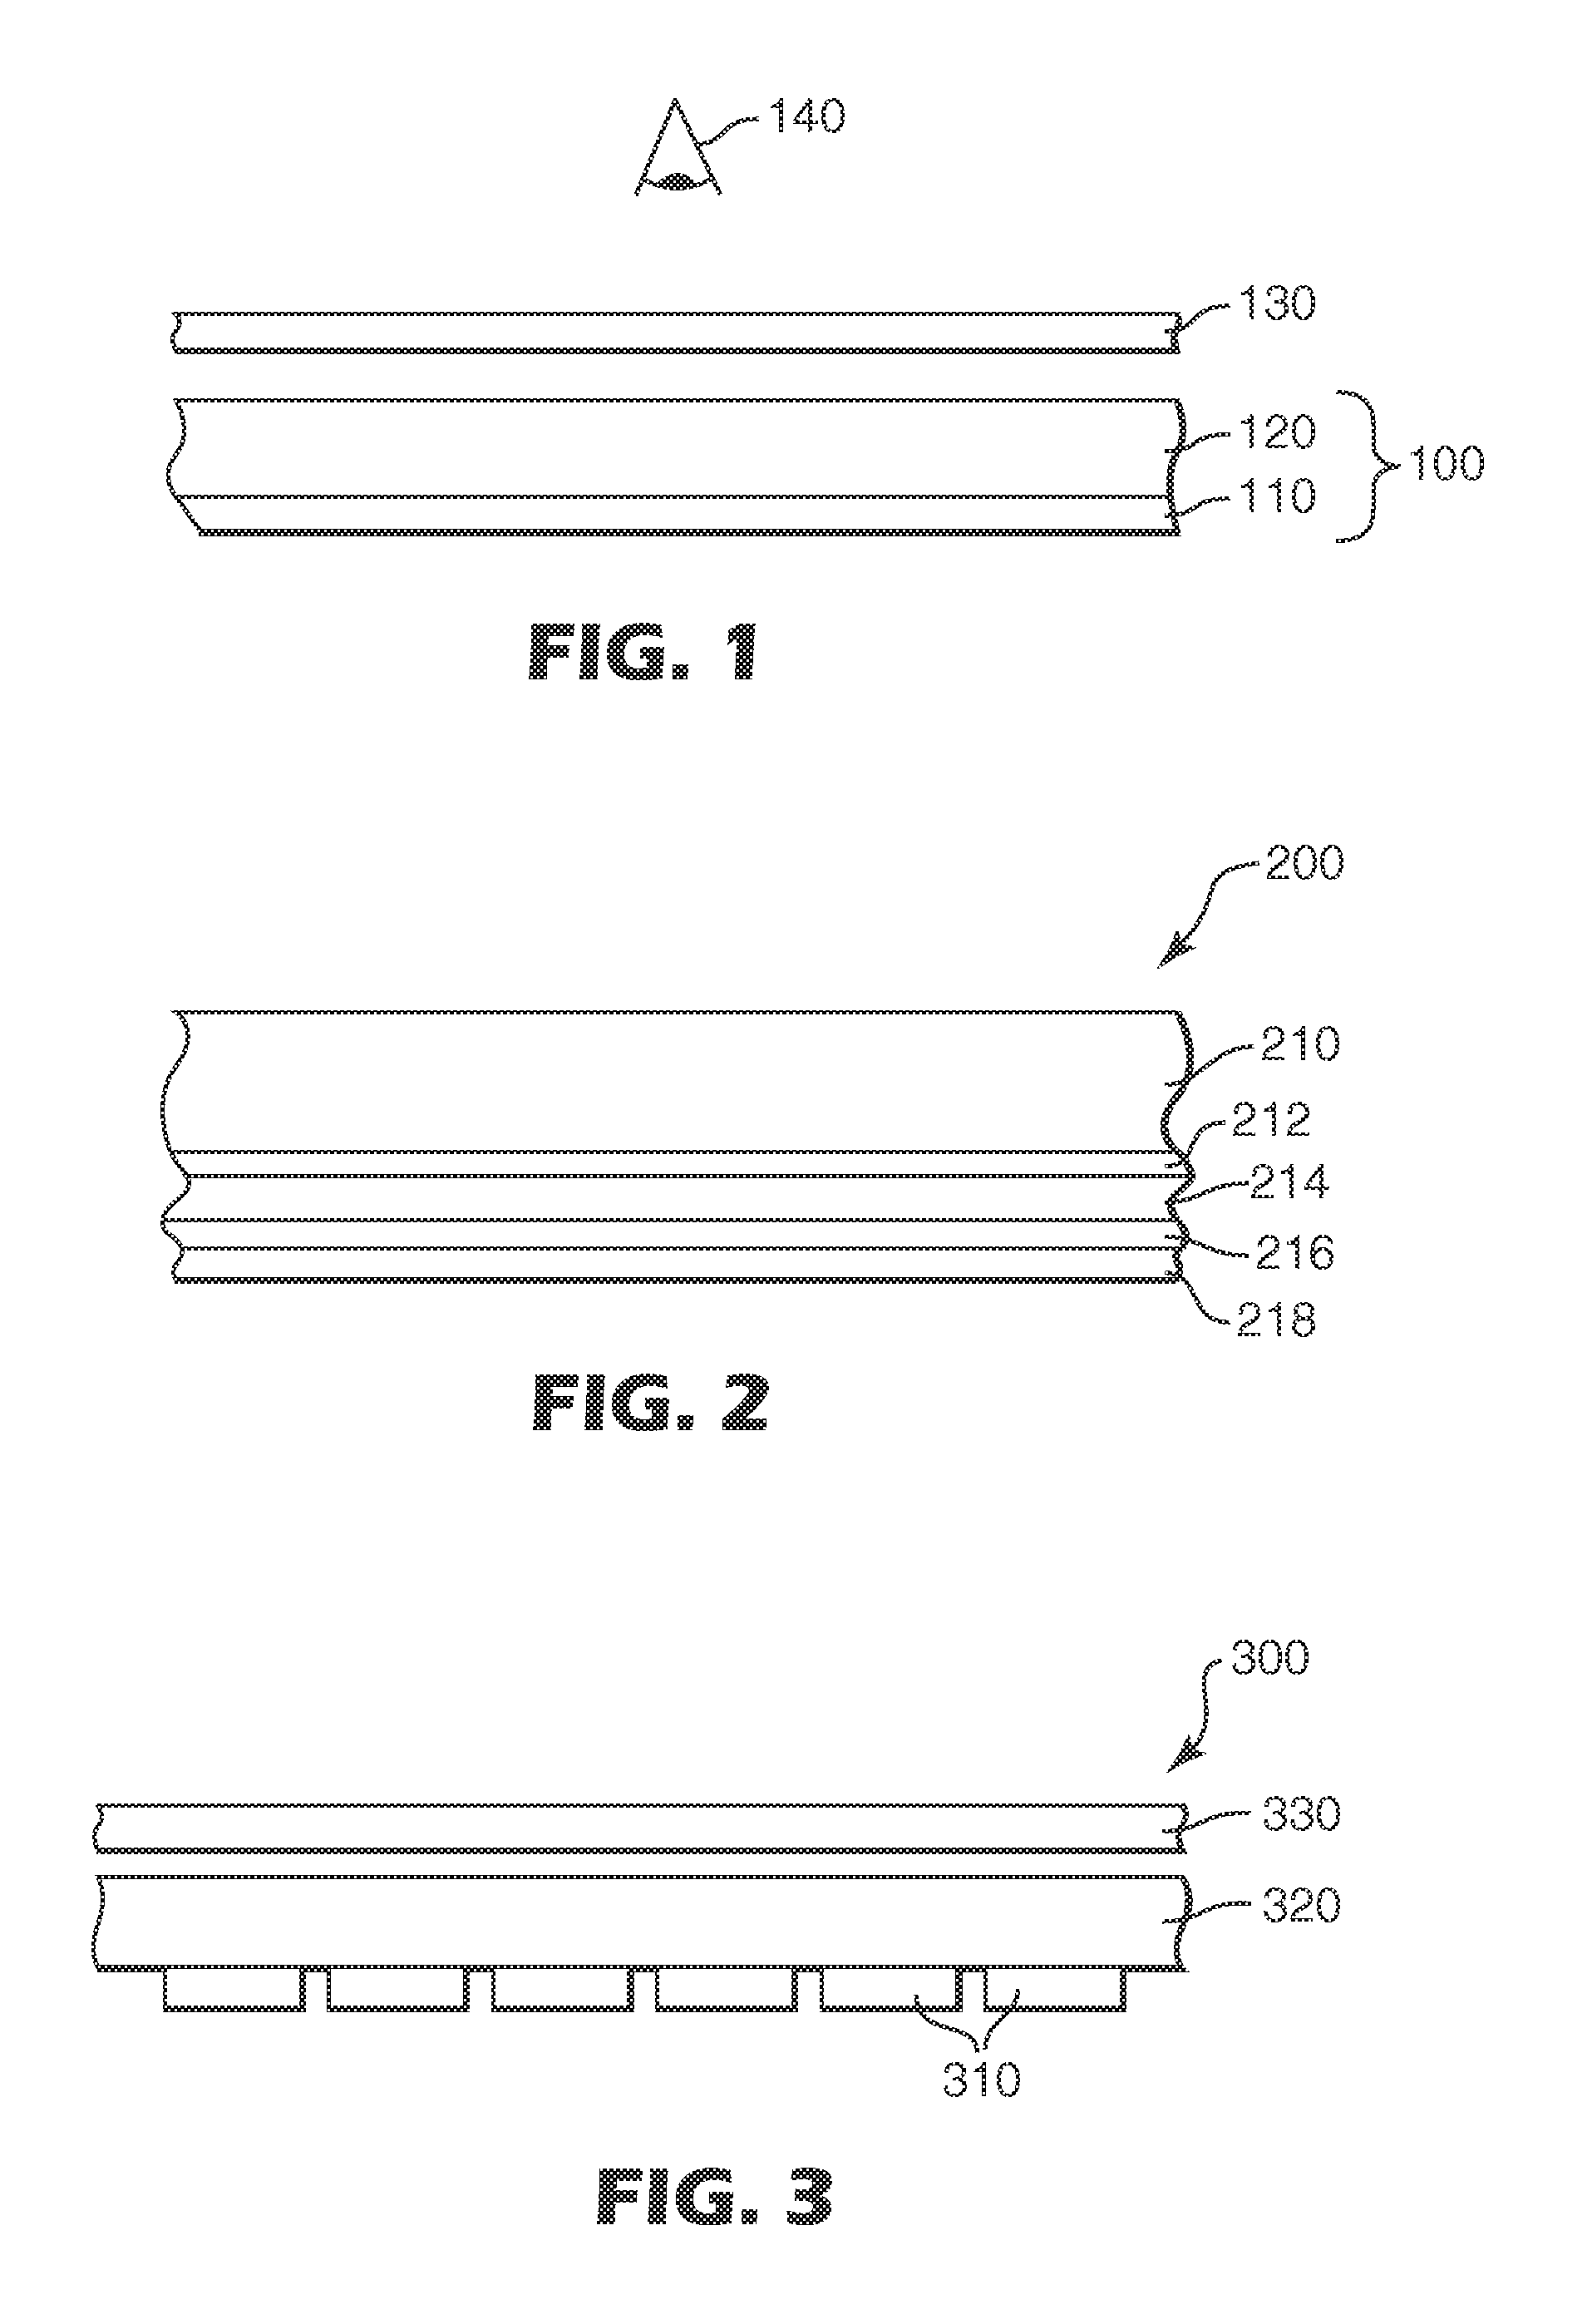 Electron transport agents for organic electronic devices